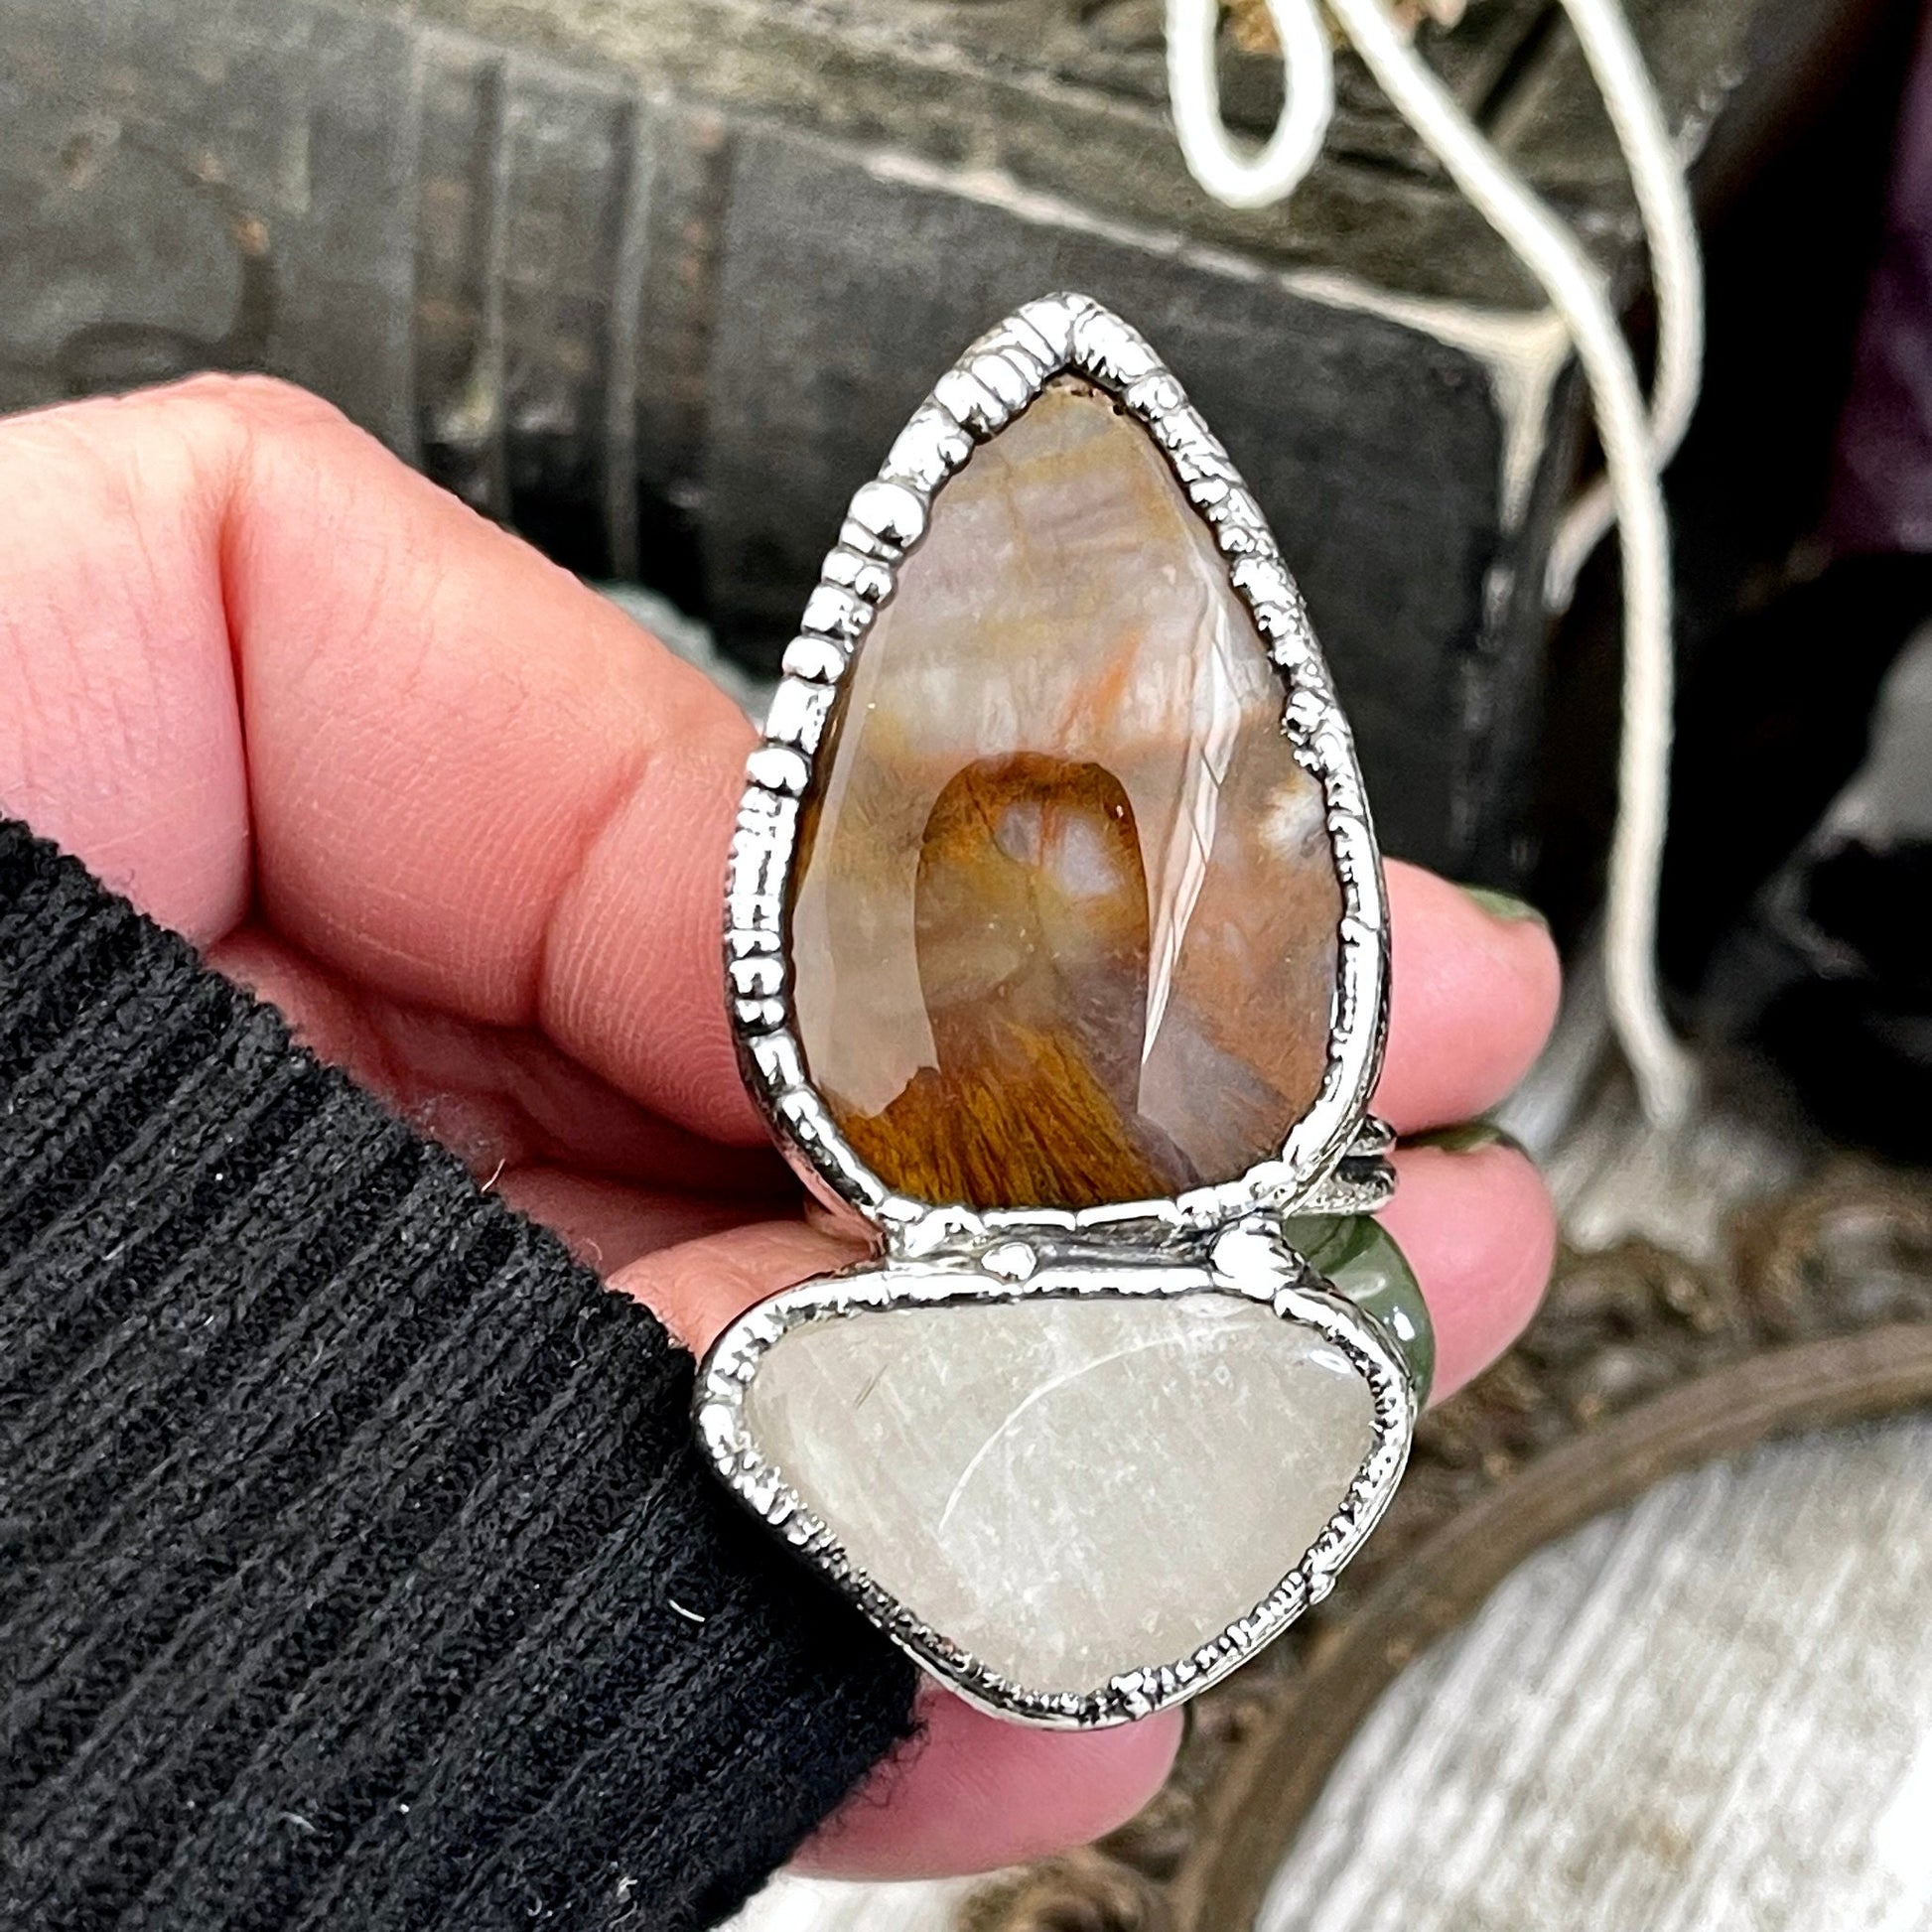 Size 10 Two Stone Ring- Fancy Moss Agate Clear Quartz Crystal Ring Fine Silver / Foxlark Collection - One of a Kind / Statement Jewelry